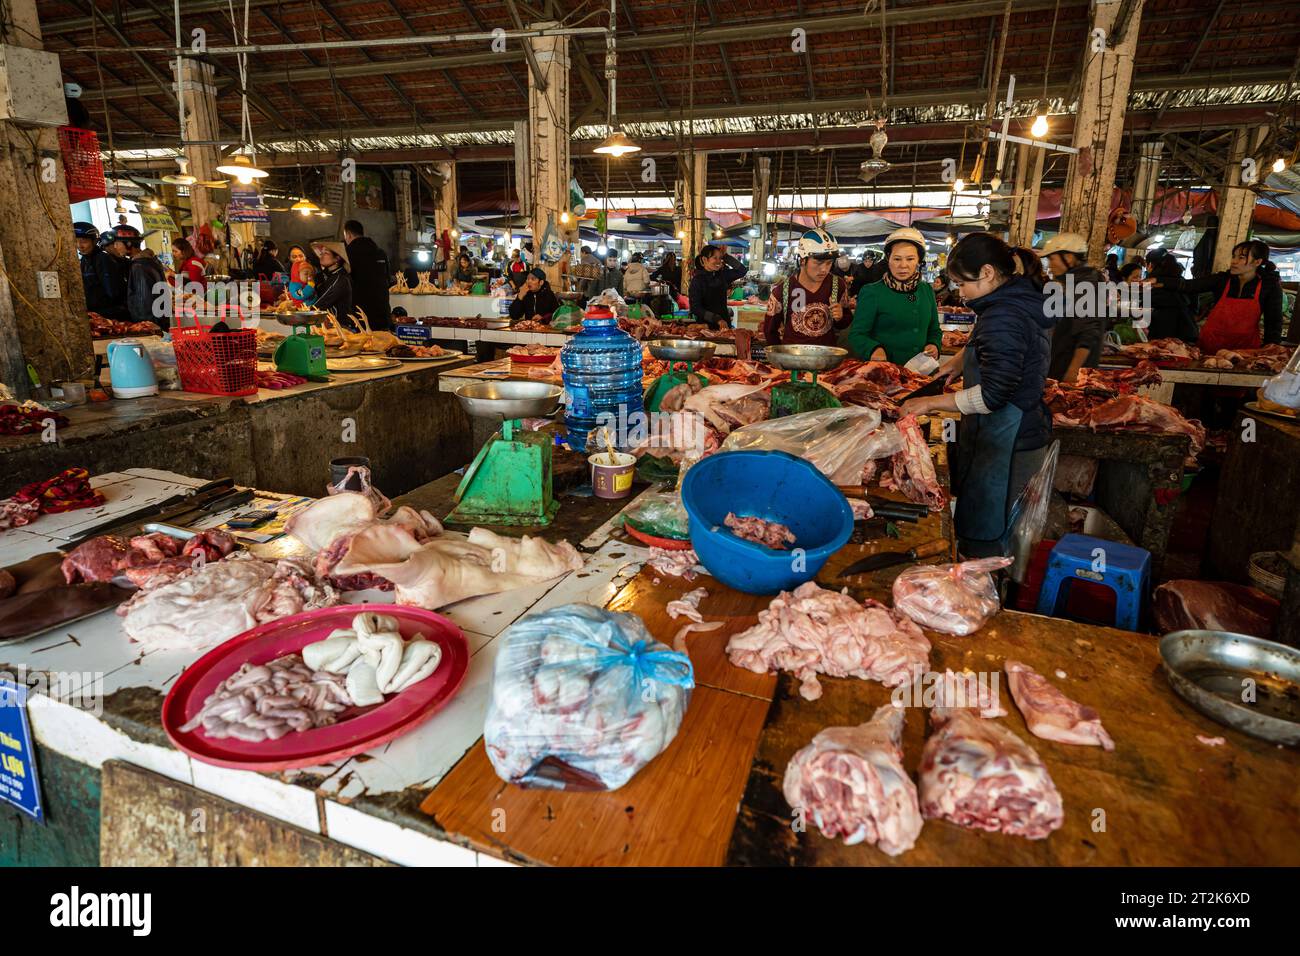 The meat market of Sapa in Vietnam Stock Photo